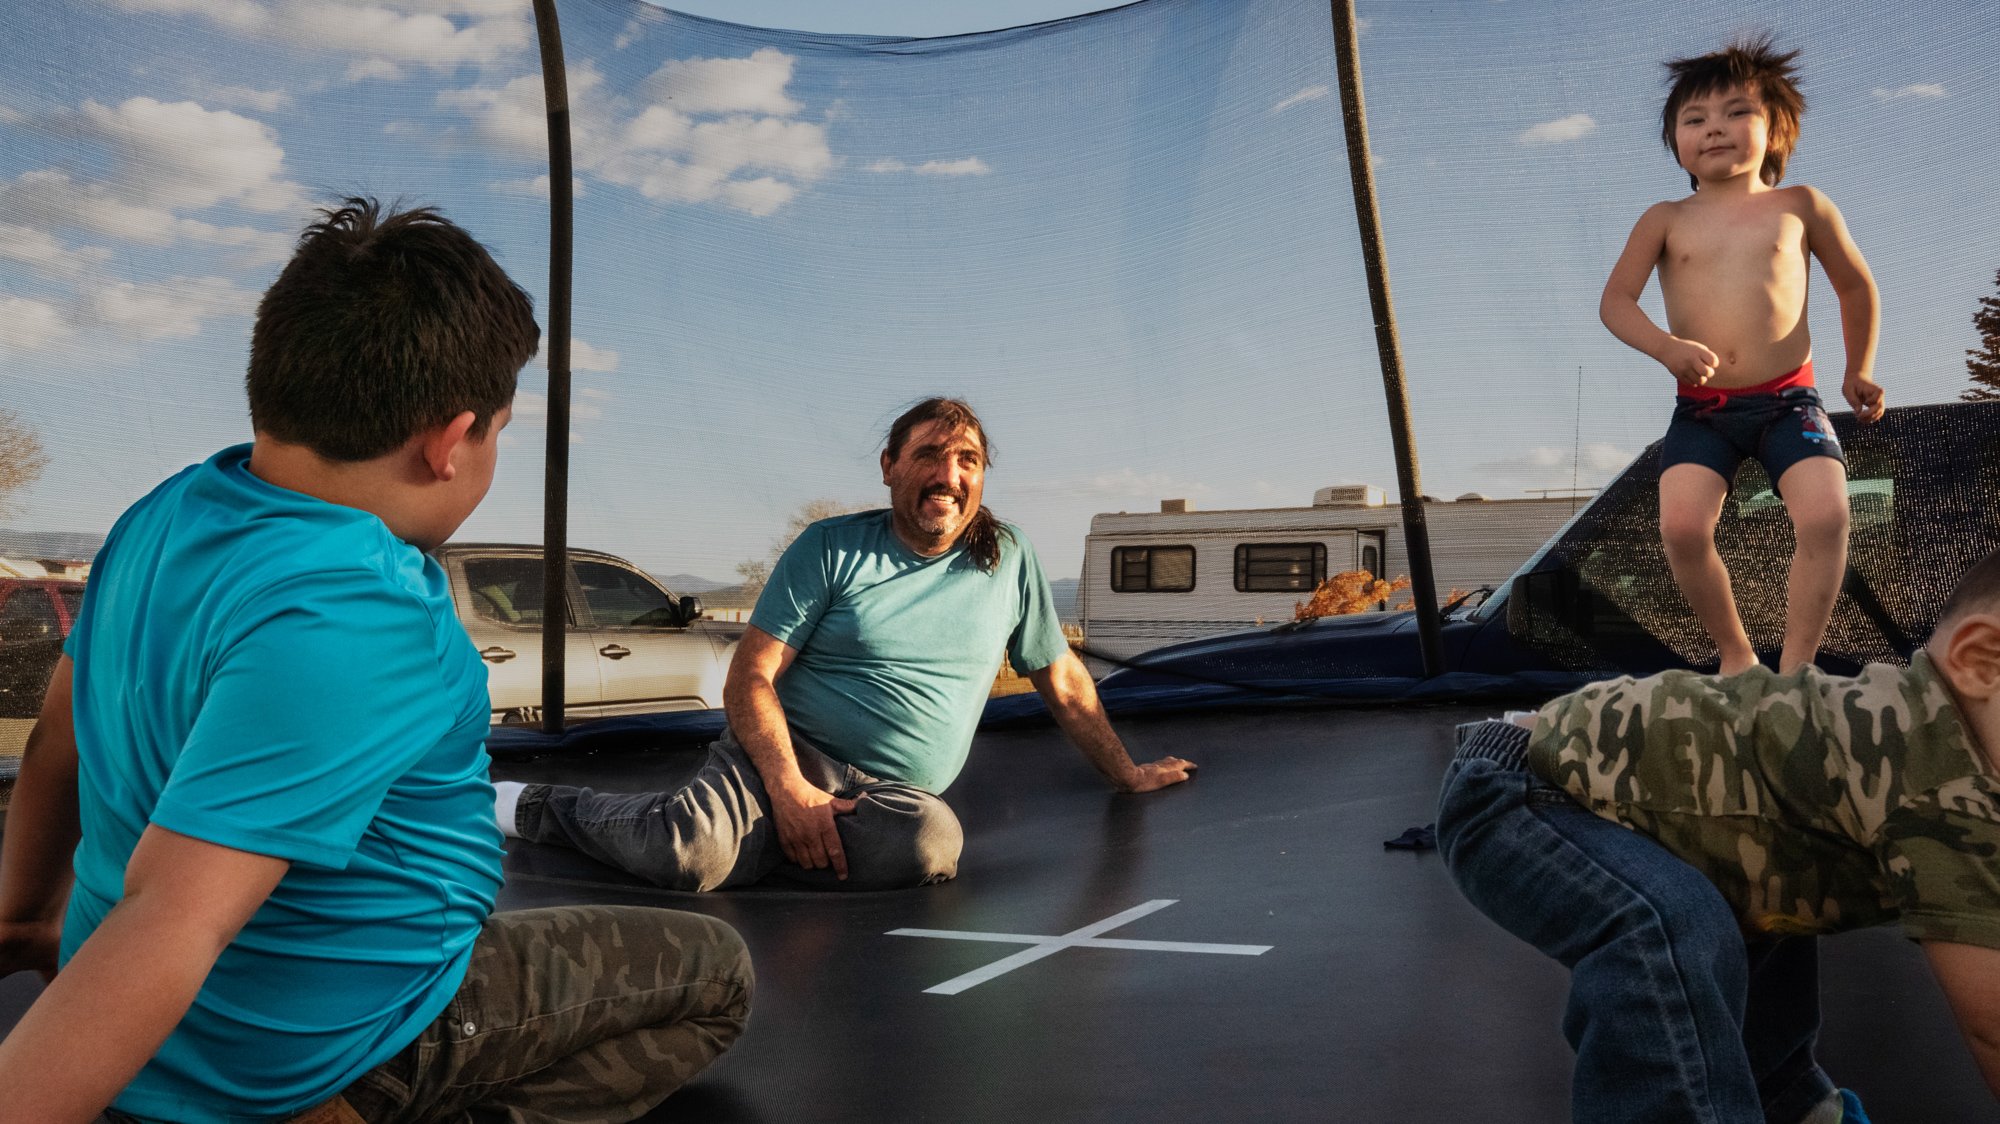   Arnold Quintana sits on a trampoline at home with his grandchildren.  